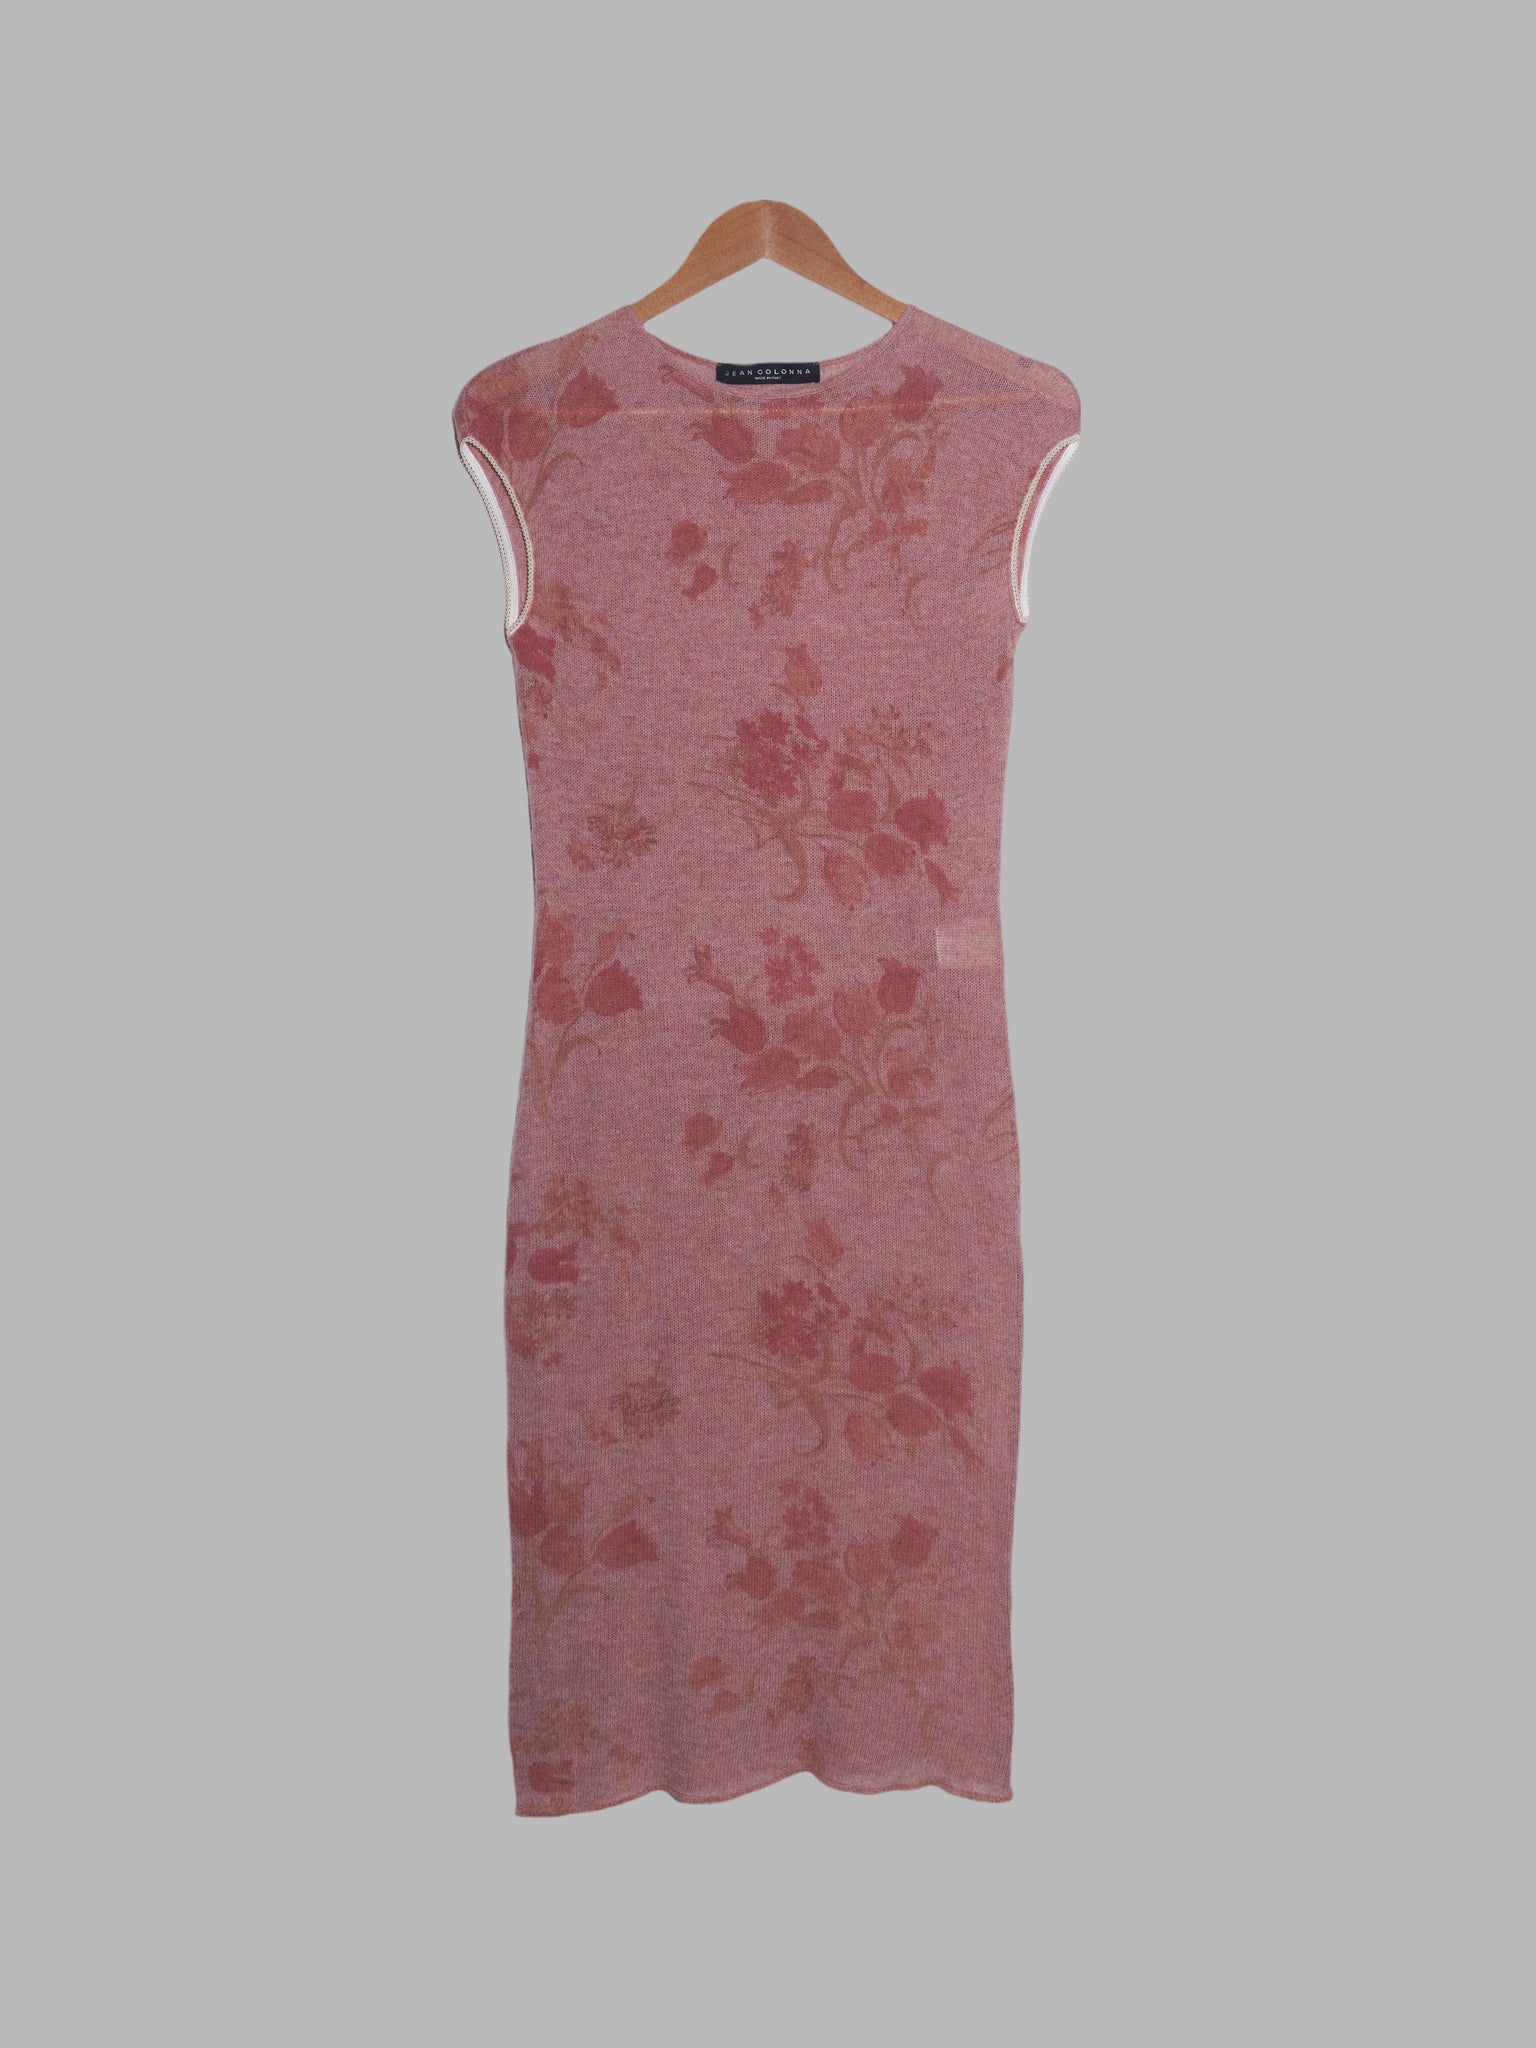 Jean Colonna pink floral print wool sleeveless dress with white lace armhole